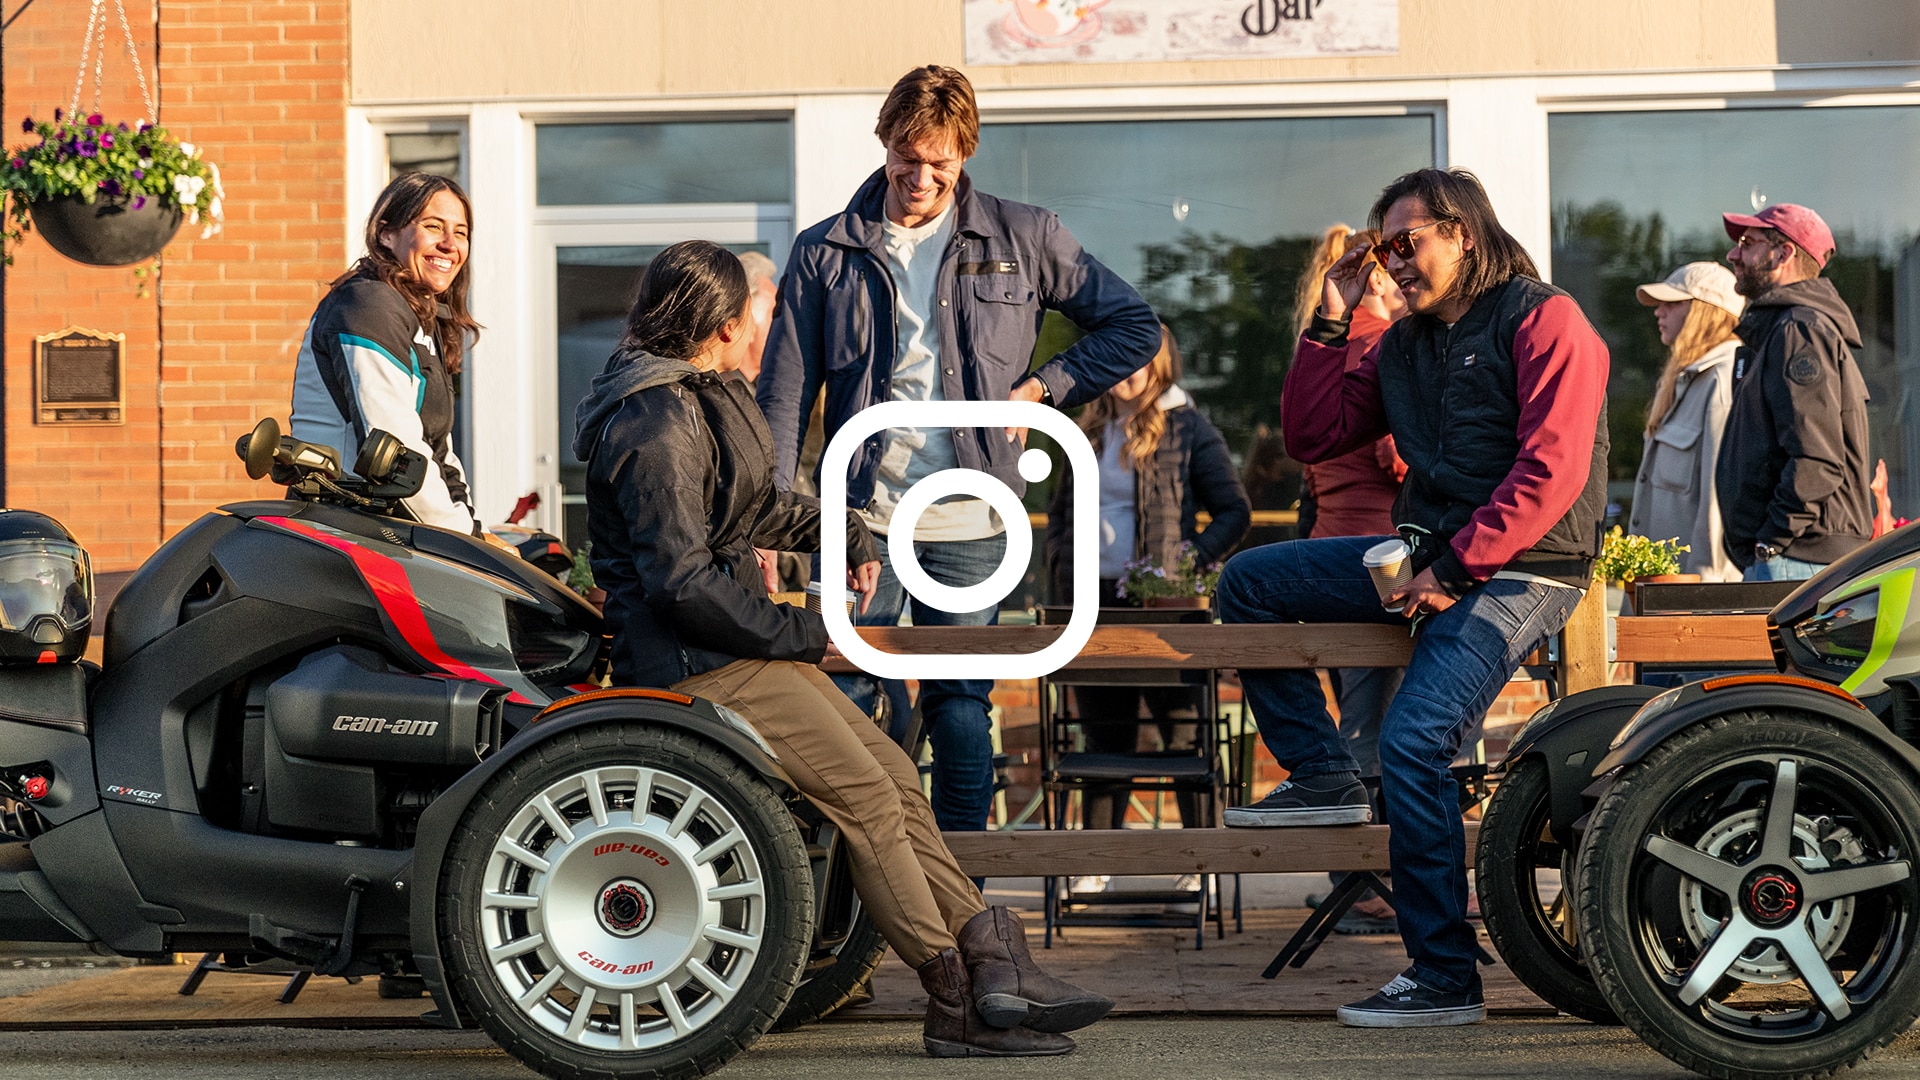 Three people laughing and talking on their Can-Am 3-Wheel vehicle with a Instagram logo over the image